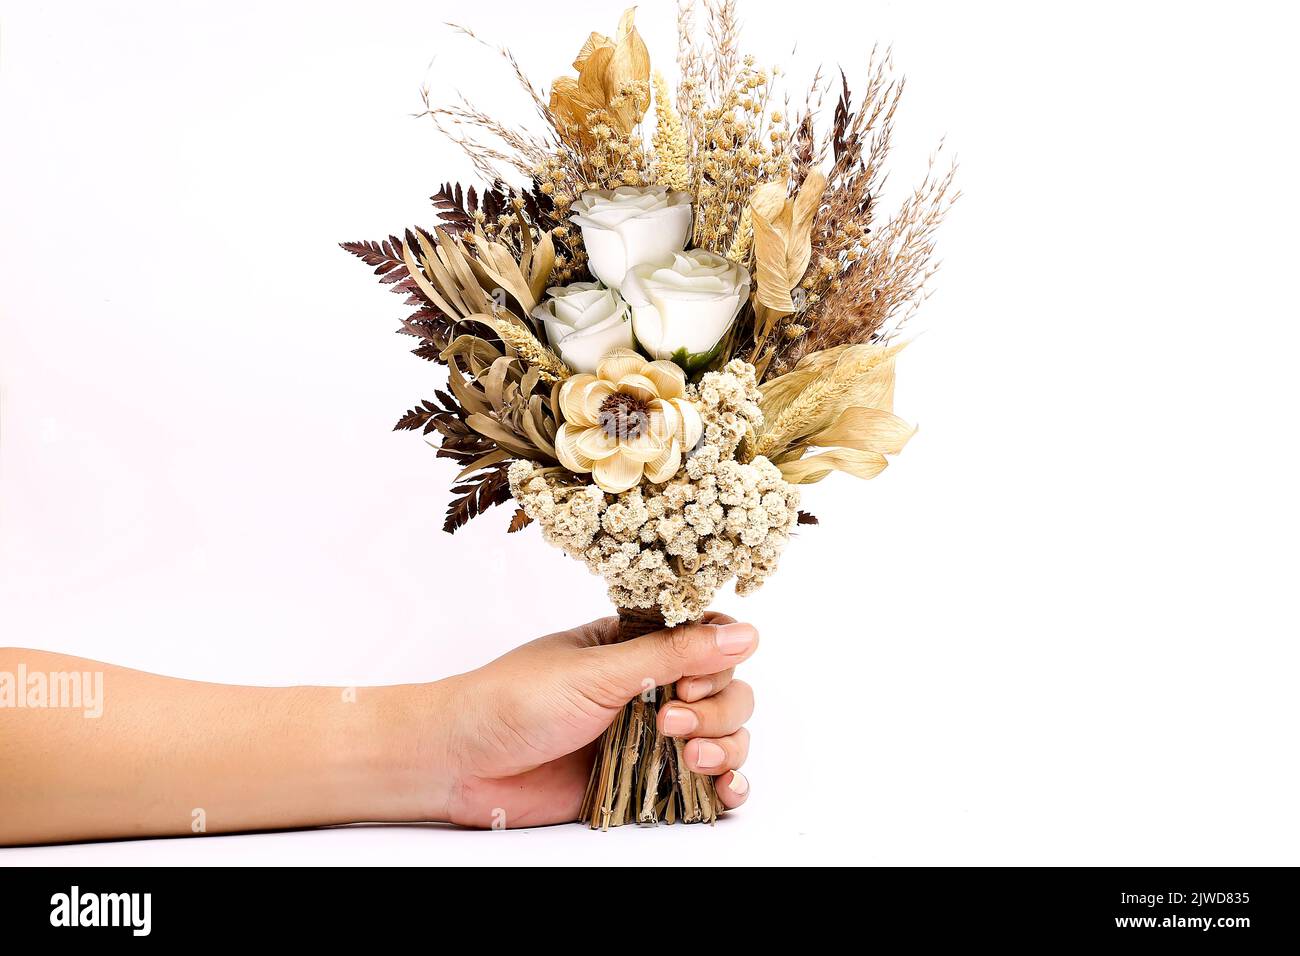 bouquet of edelweiss flowers and dried leaves hand held isolated on white background Stock Photo